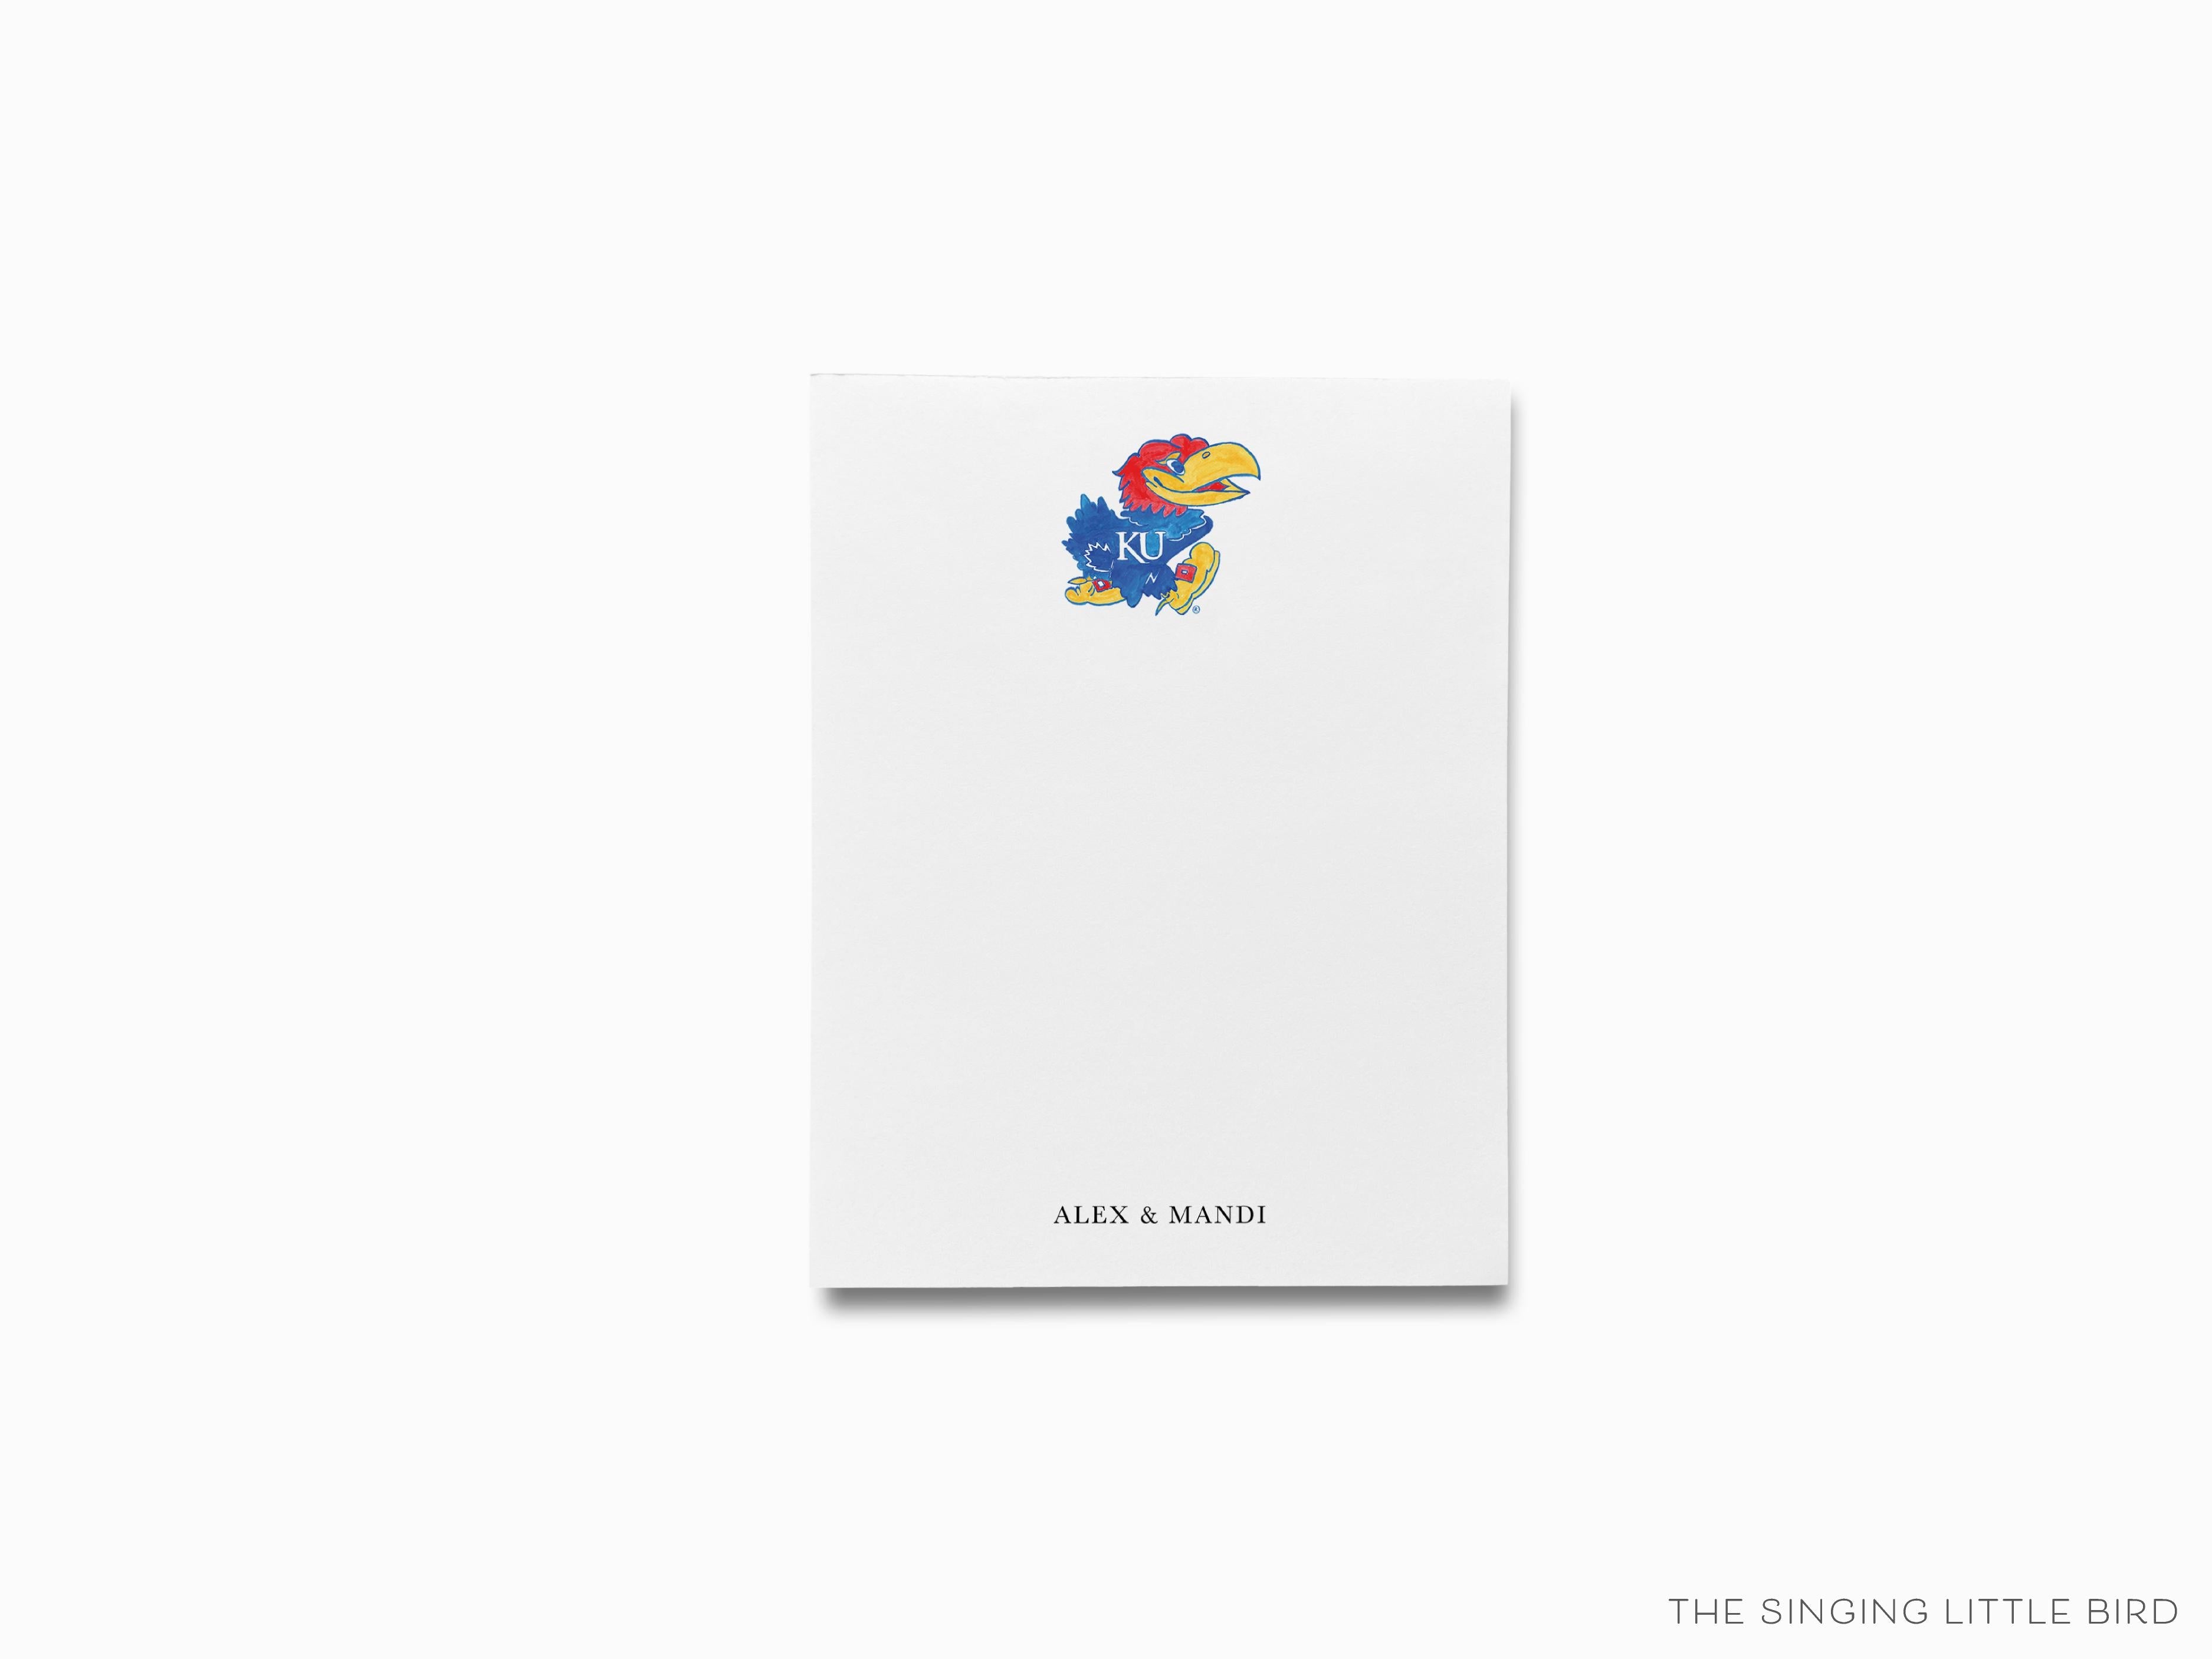 Personalized Kansas Jayhawk Notepad [Officially Licensed]-These personalized notepads feature our hand-painted watercolor Jayhawk, printed in the USA on a beautiful smooth stock. You choose which size you want (or bundled together for a beautiful gift set) and makes a great gift for the checklist and University of Kansas lover in your life.-The Singing Little Bird